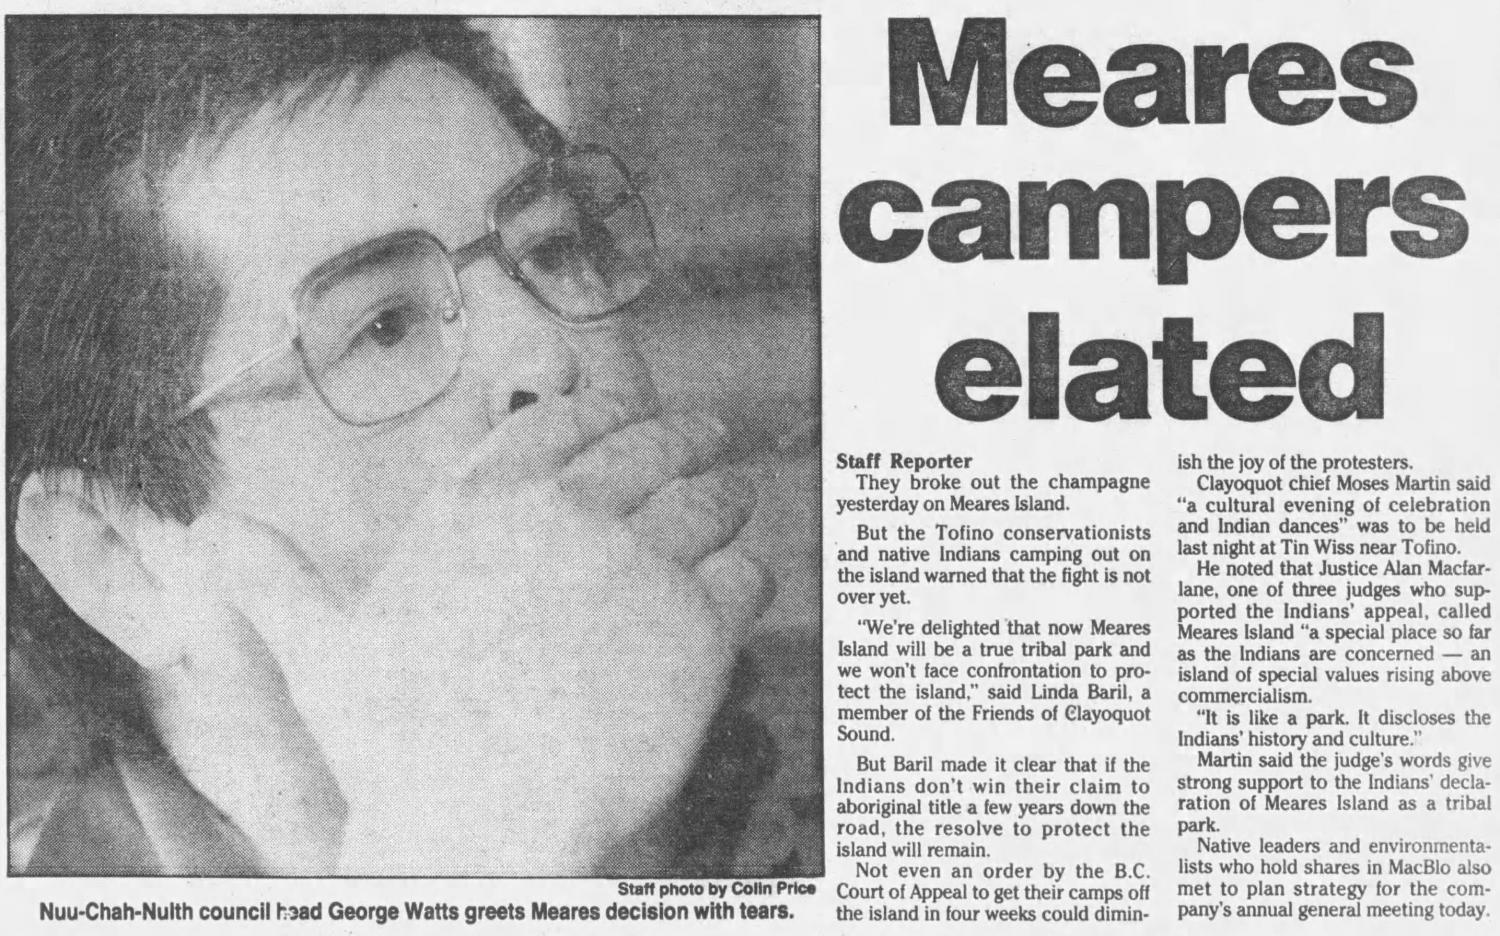 Newspaper article on B.C. Supreme Court of Appeal ruling curtailing logging on Meares Island in March 1985.